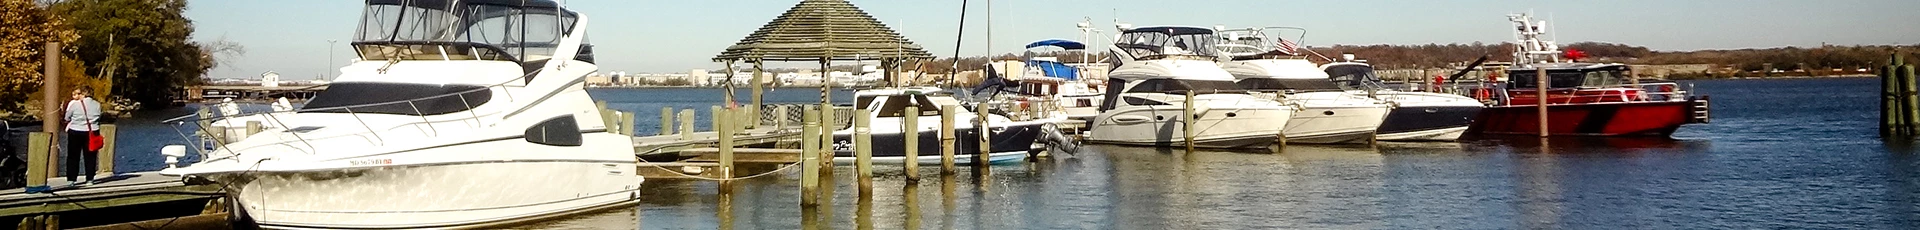 Boat Removal, Dismantle and Disposal in Boston Massachusetts